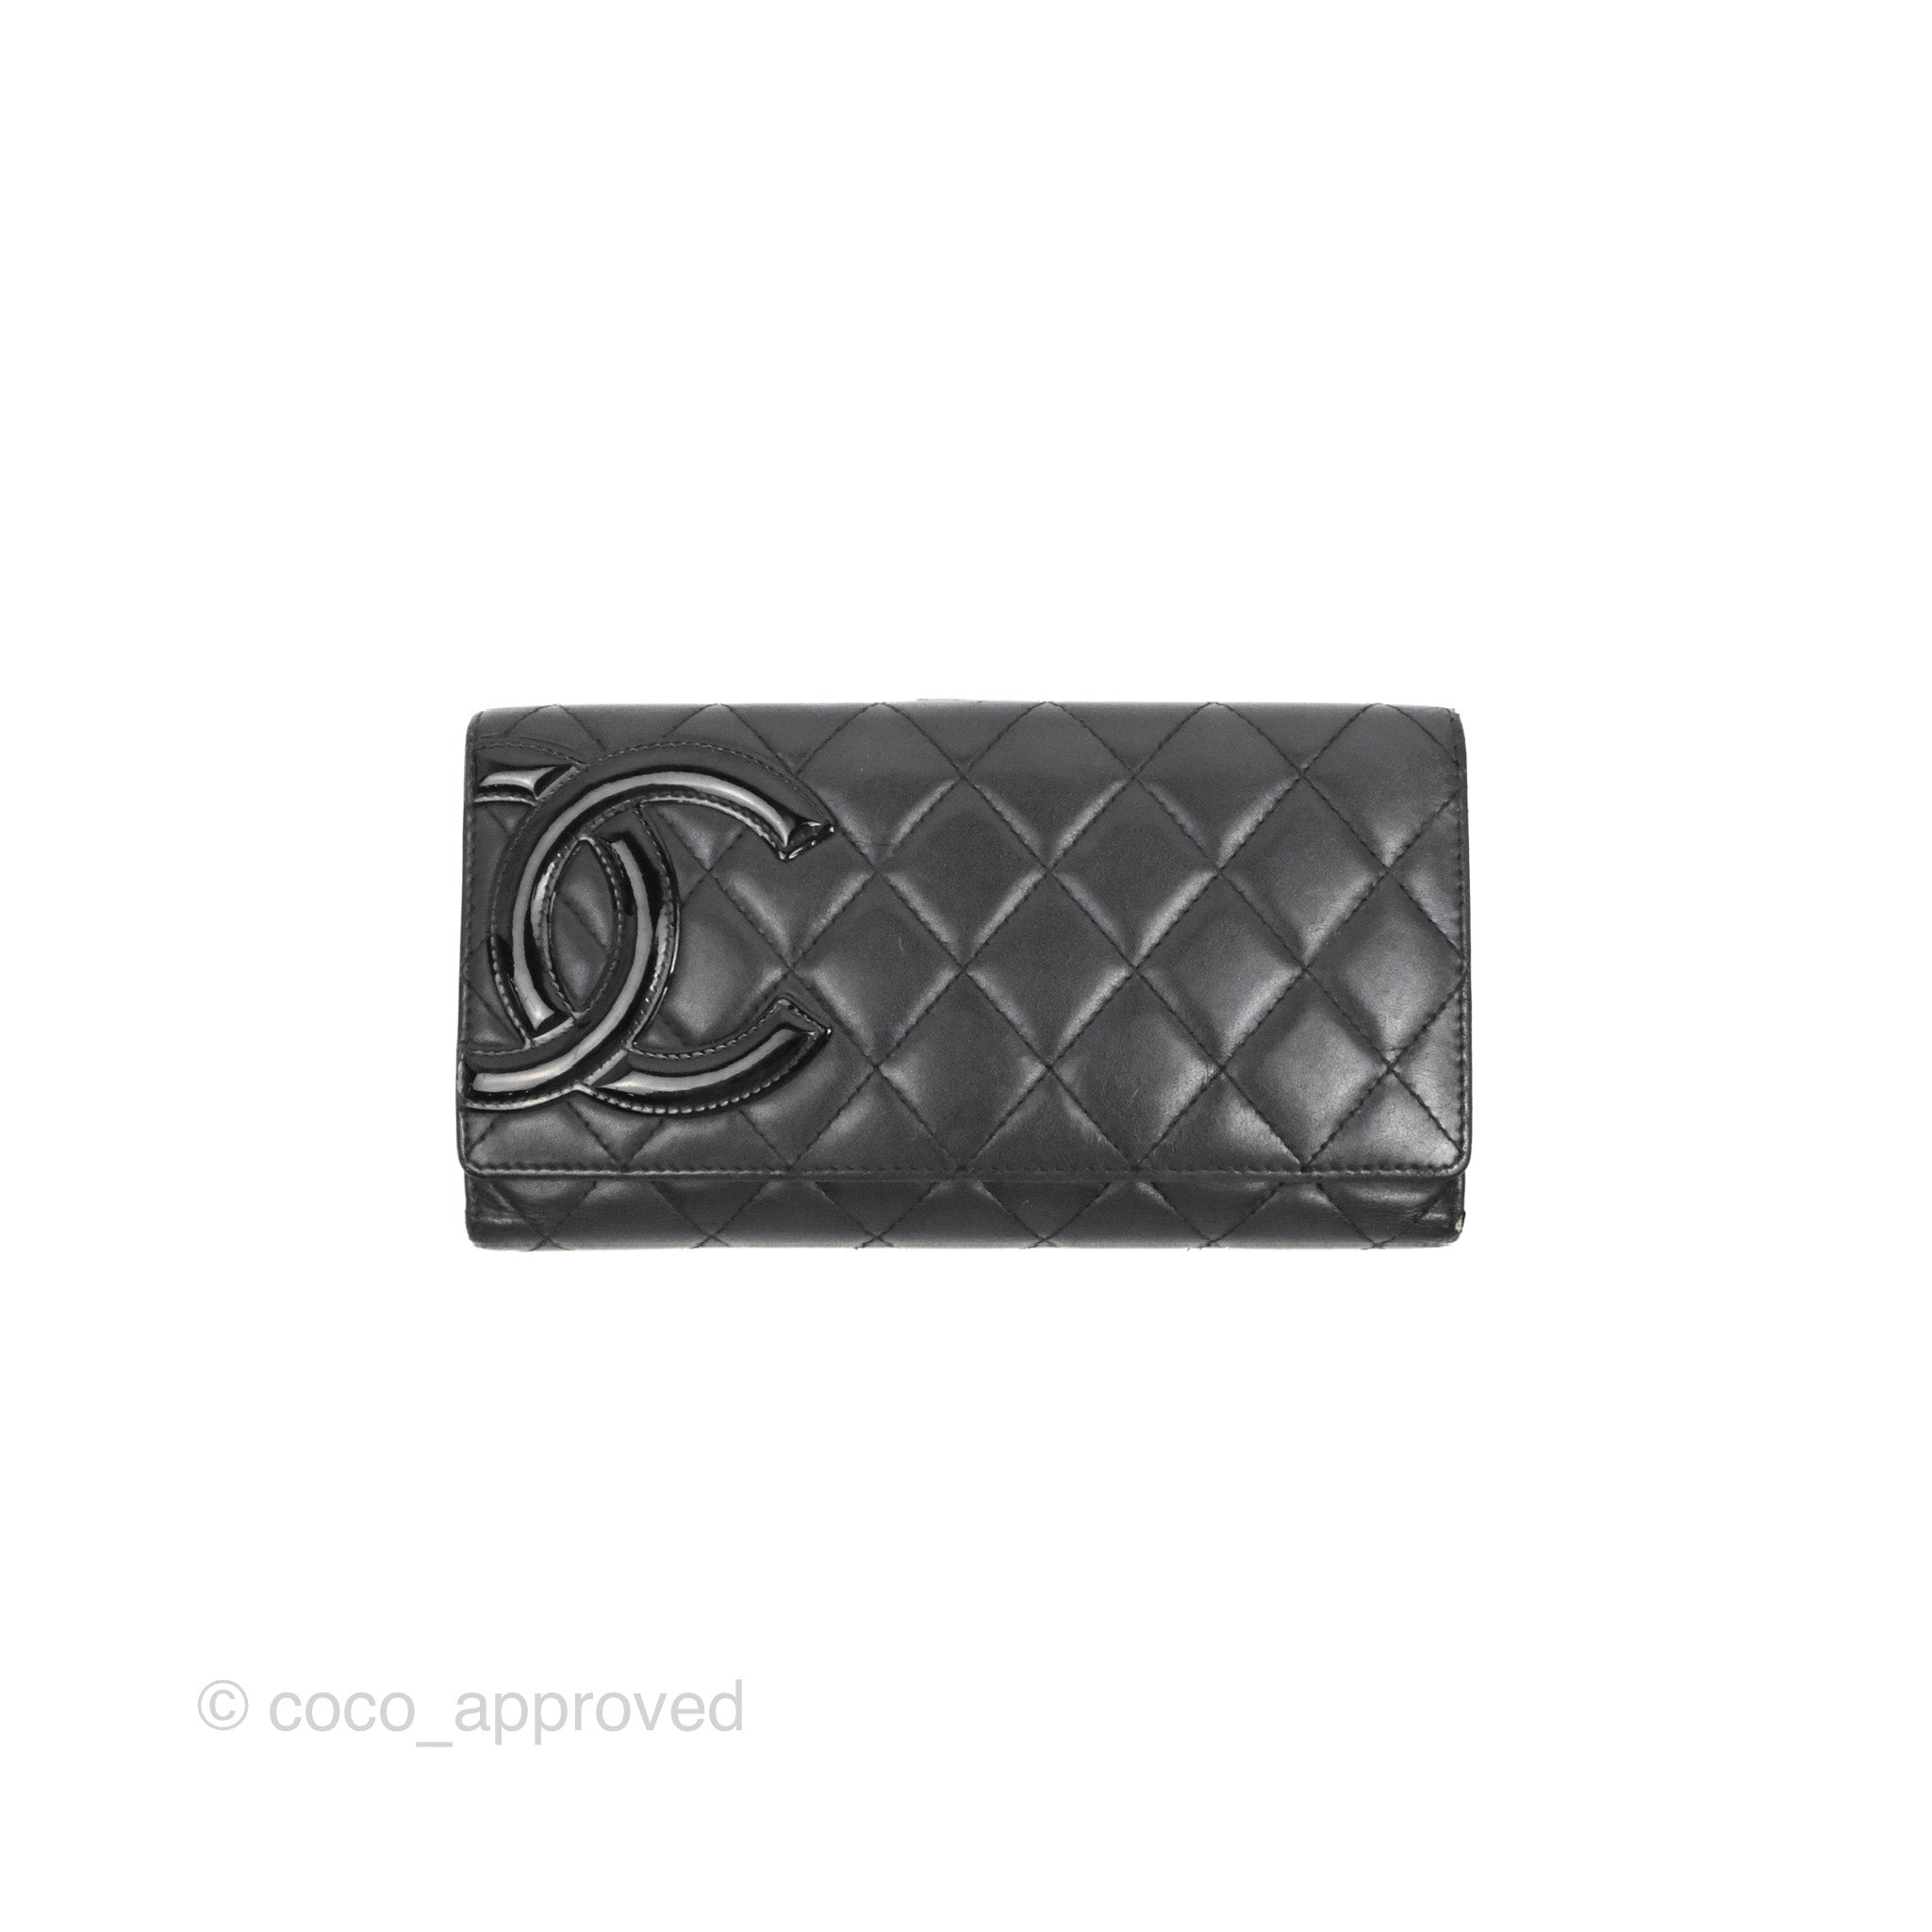 Sold at Auction: CHANEL - CAMBON LINE BIFOLD WALLET